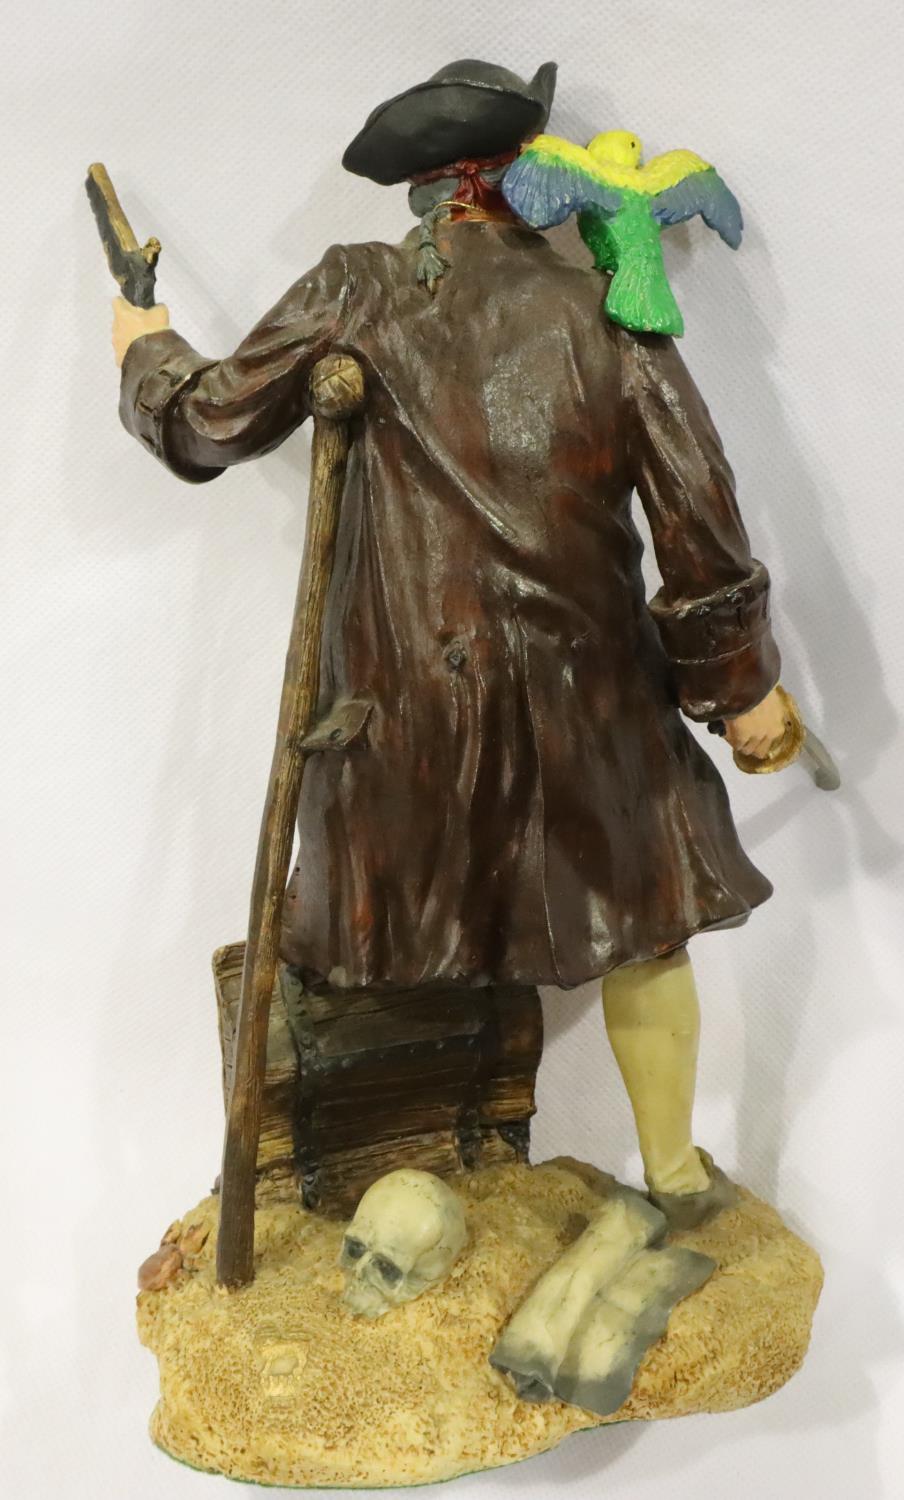 Royal Doulton resin figurines including Long John Silver and The Pied Piper, Long John Silver - Image 6 of 7